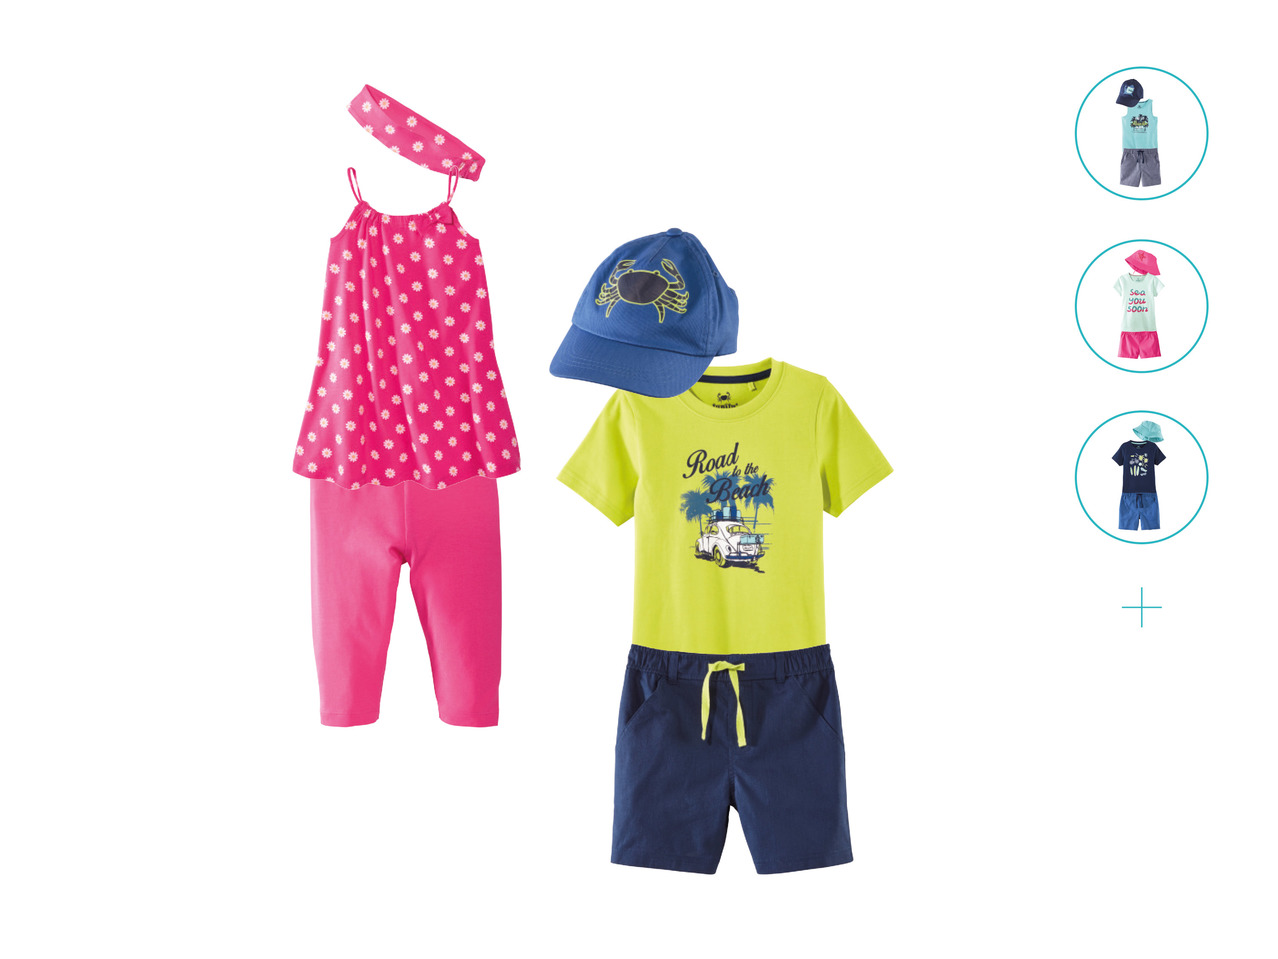 Lupilu Kids' Summer Outfit1